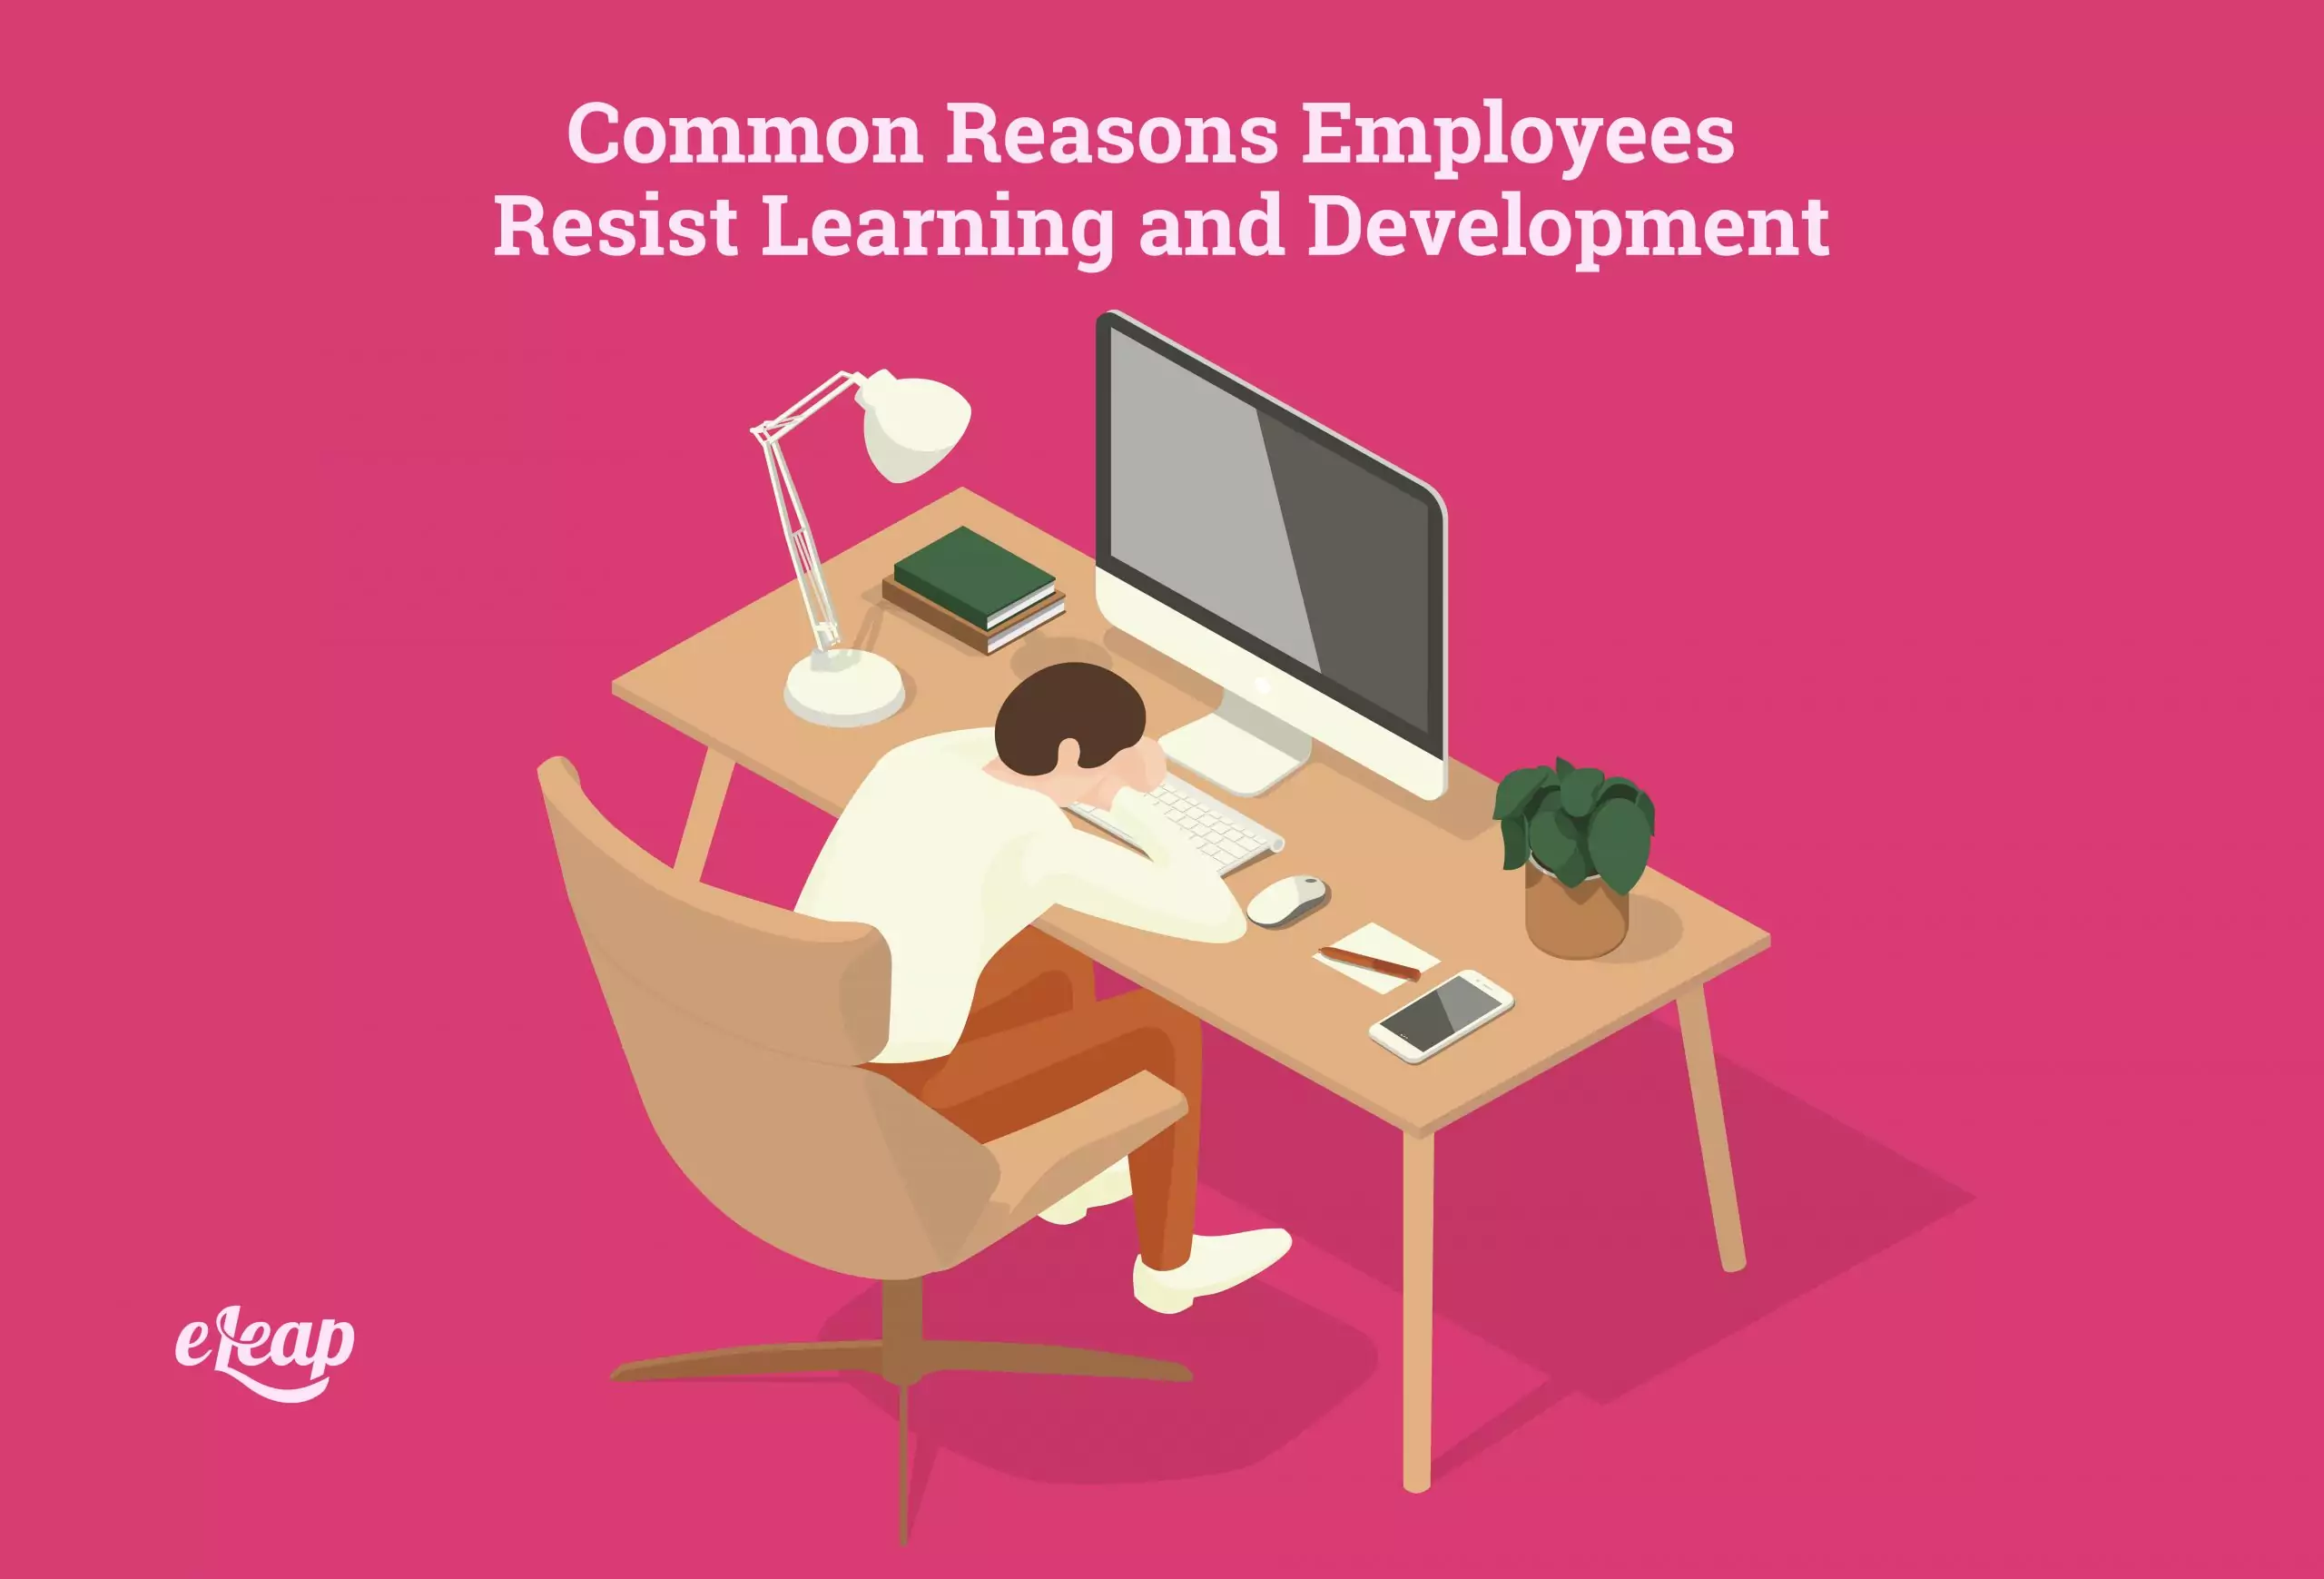 Common Reasons Employees Resist Learning and Development